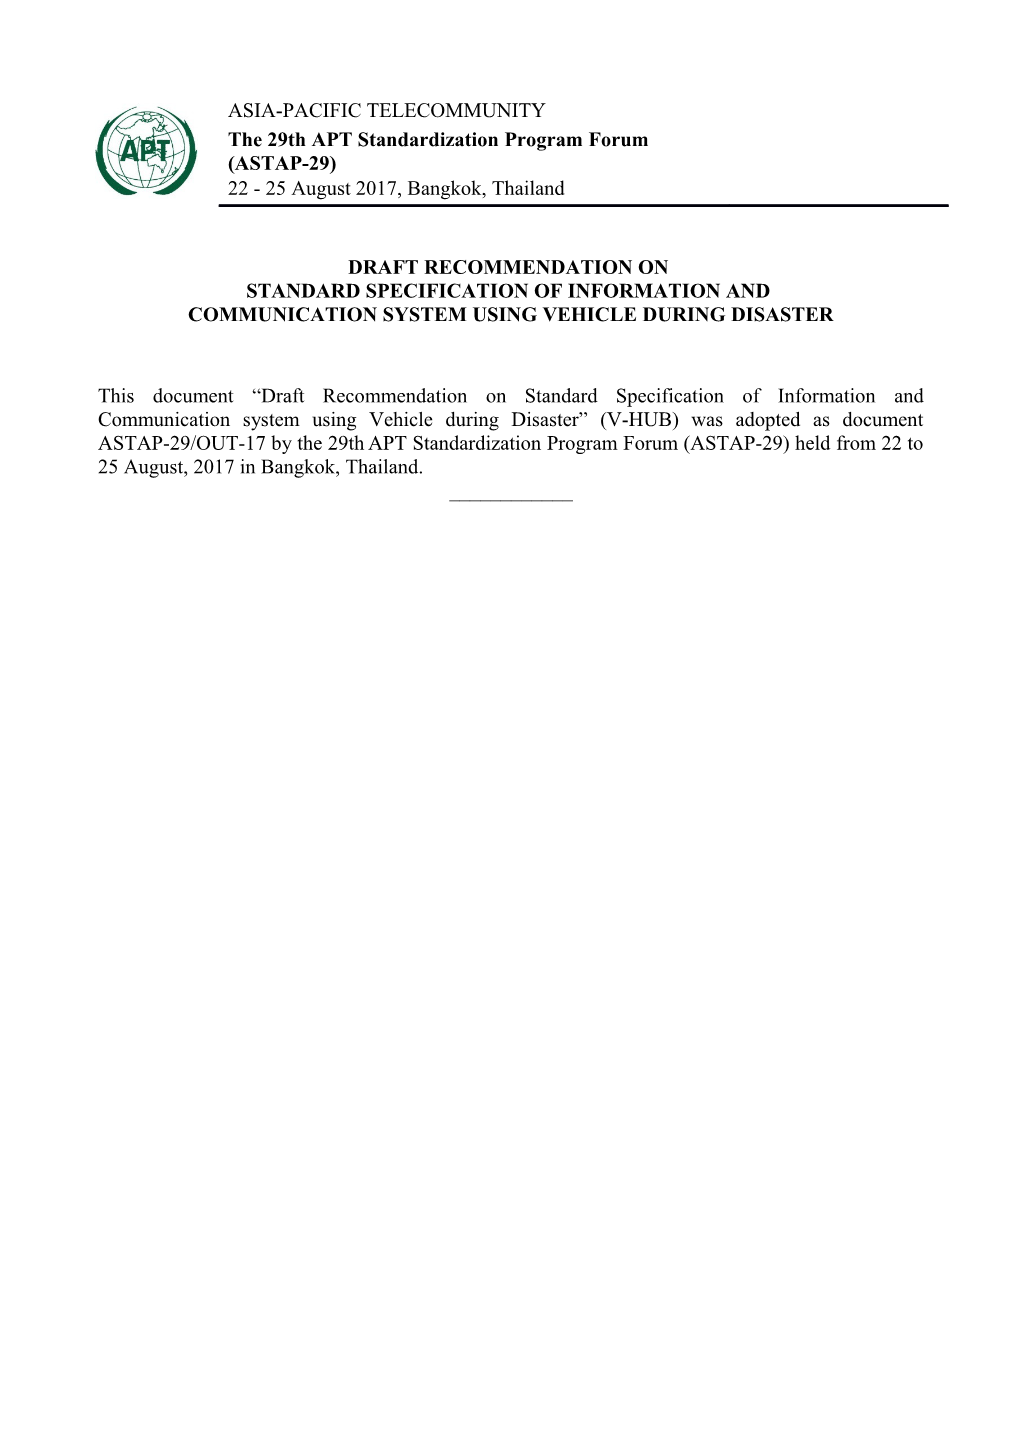 Draft Recommendation on Standard Specification of Information and Communication System